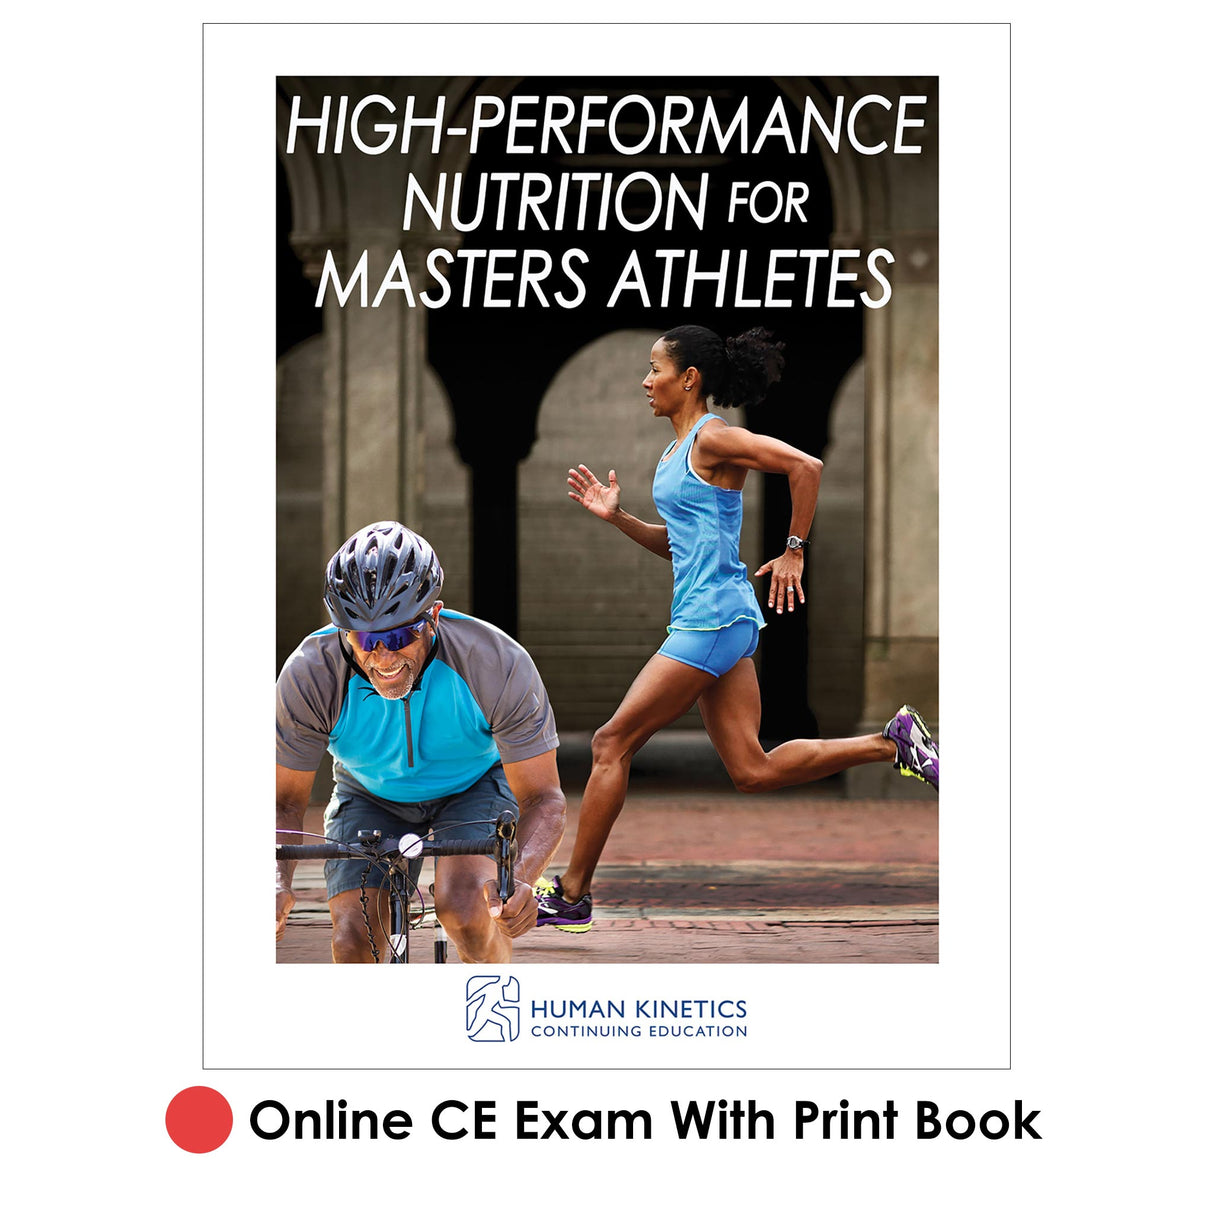 High-Performance Nutrition for Masters Athletes Online CE Exam With Print Book